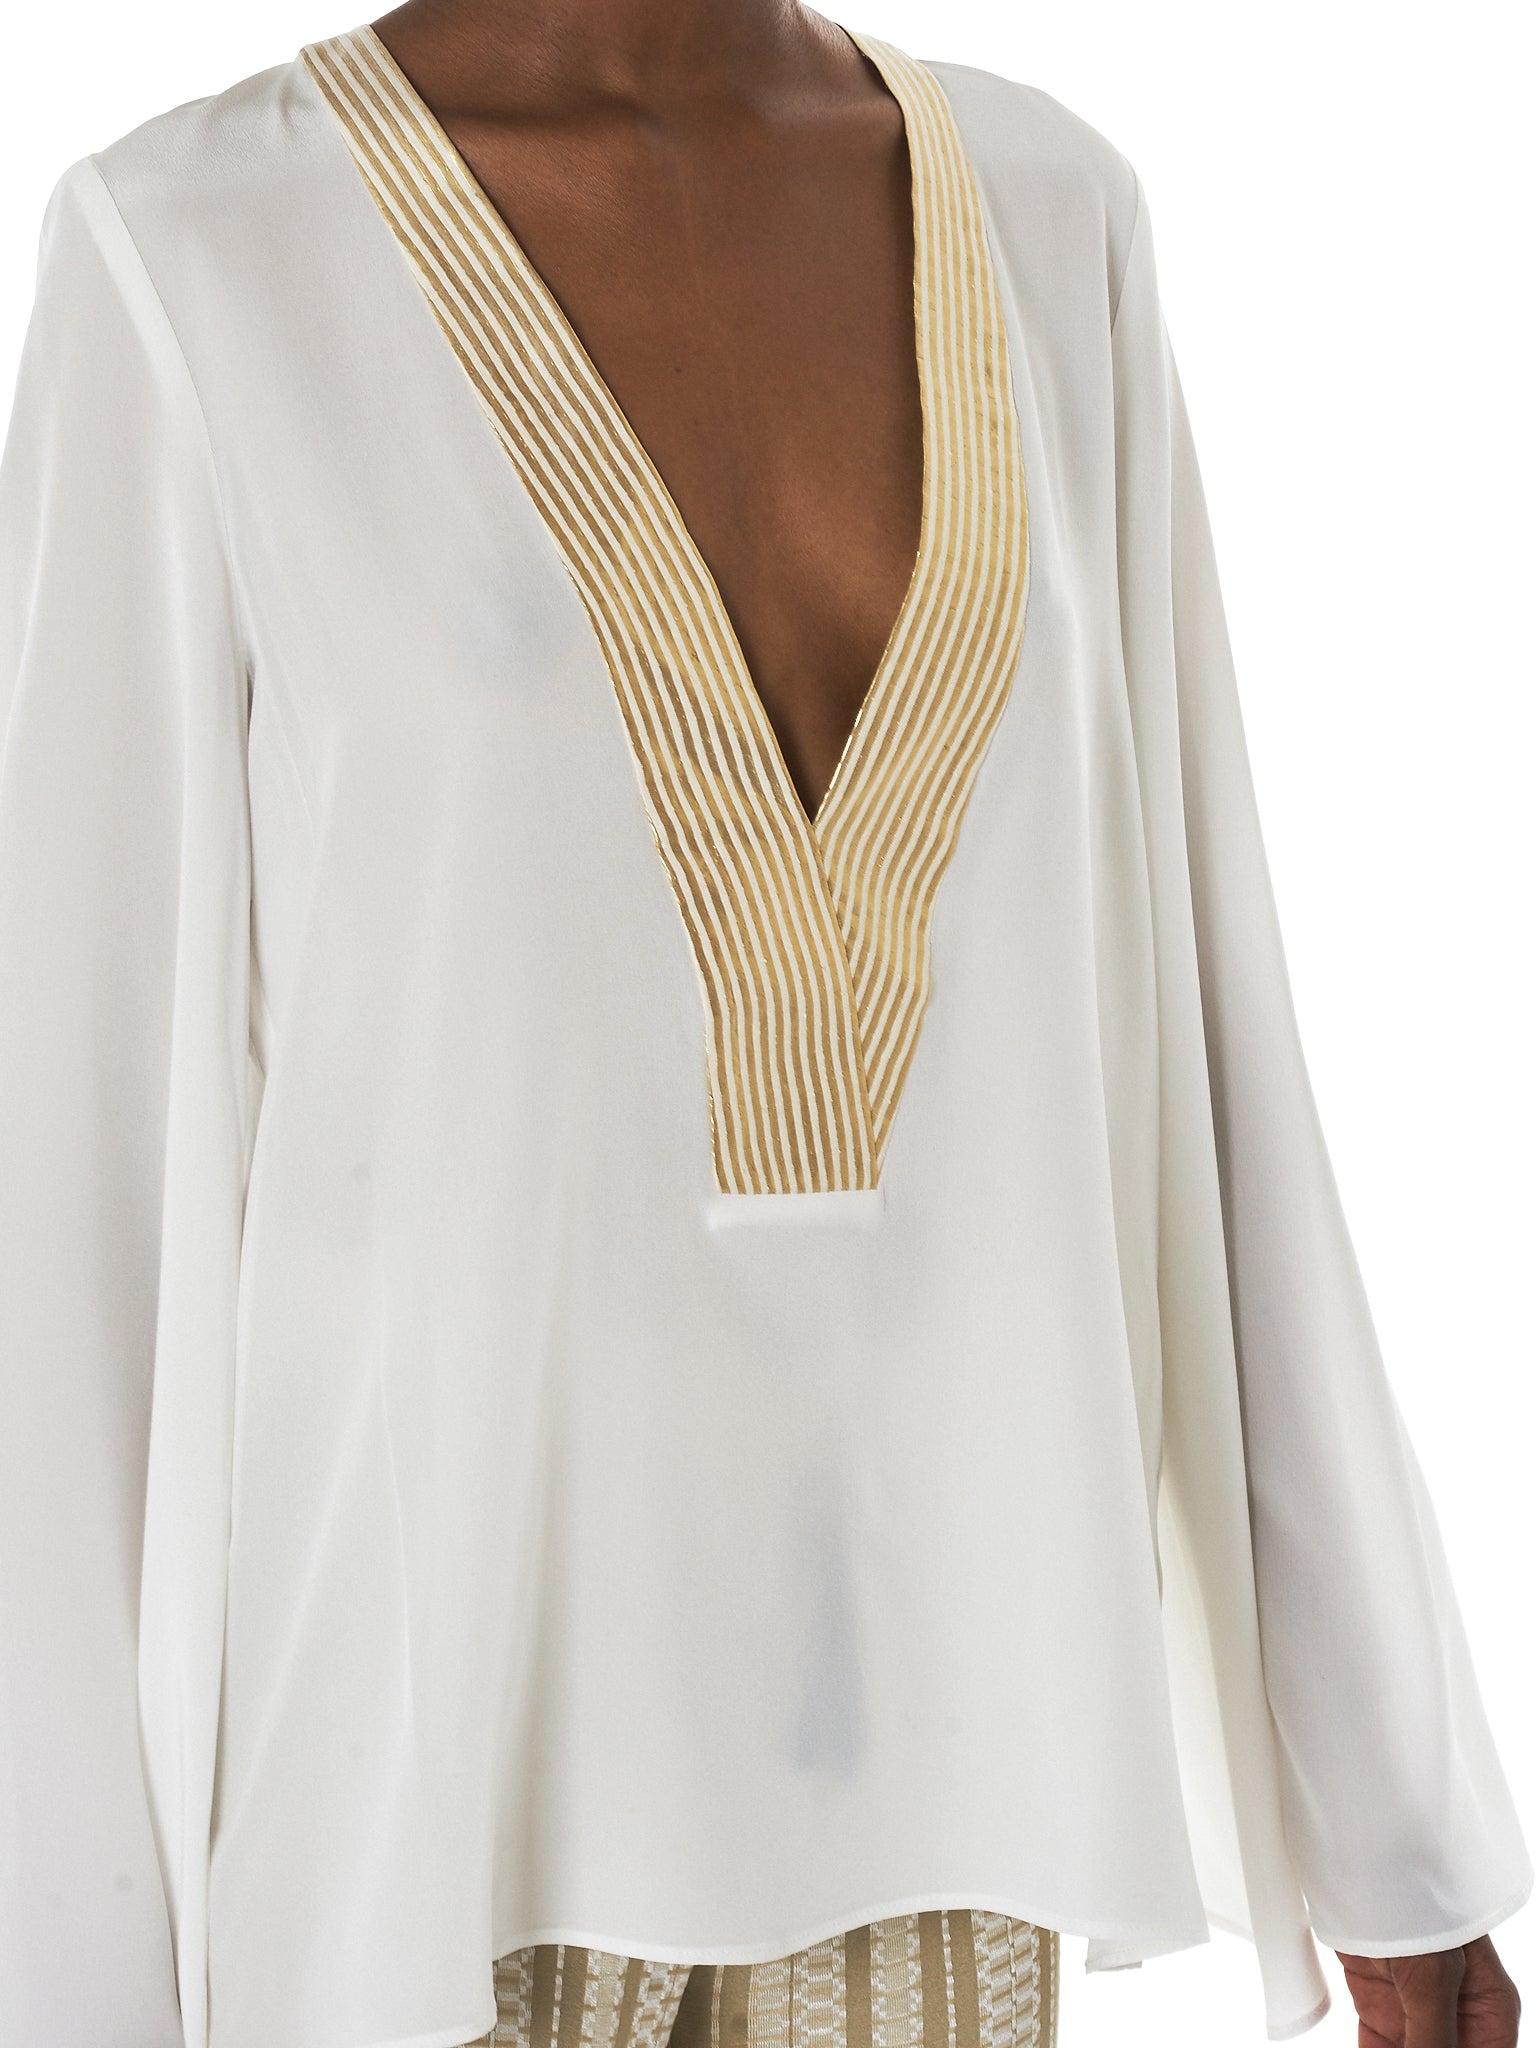 Zeus + Dione Gold Striped Blouse - Hlorenzo Detail 1